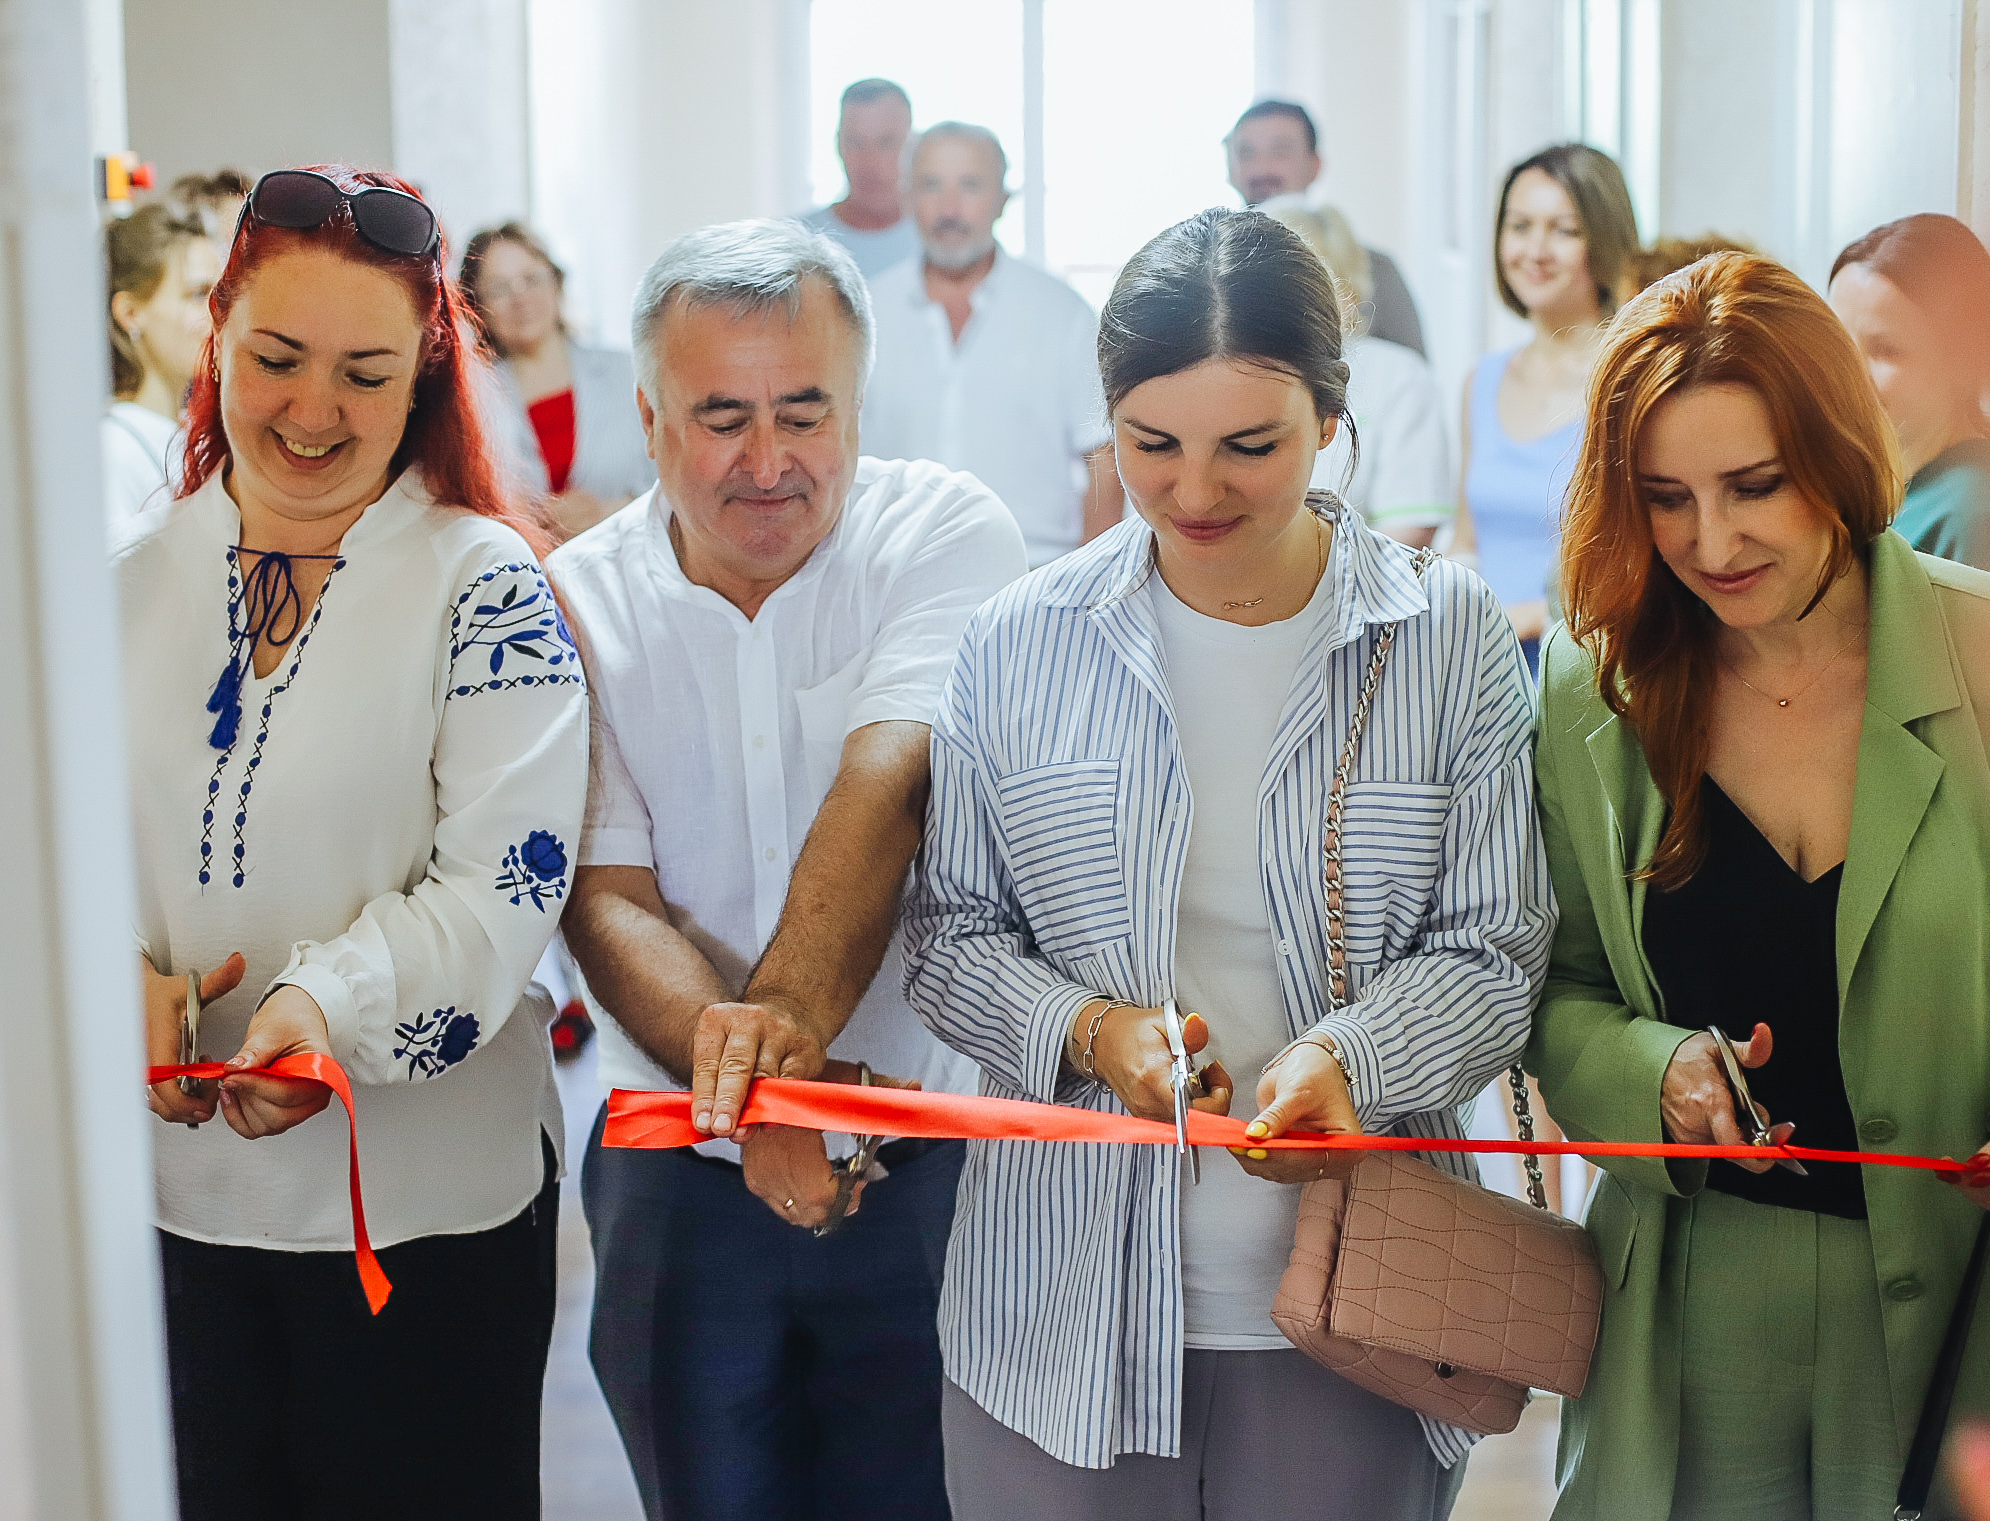 A modern call center was launched in the Odesa region, specifically in the healthcare facilities of the Rozdilna community